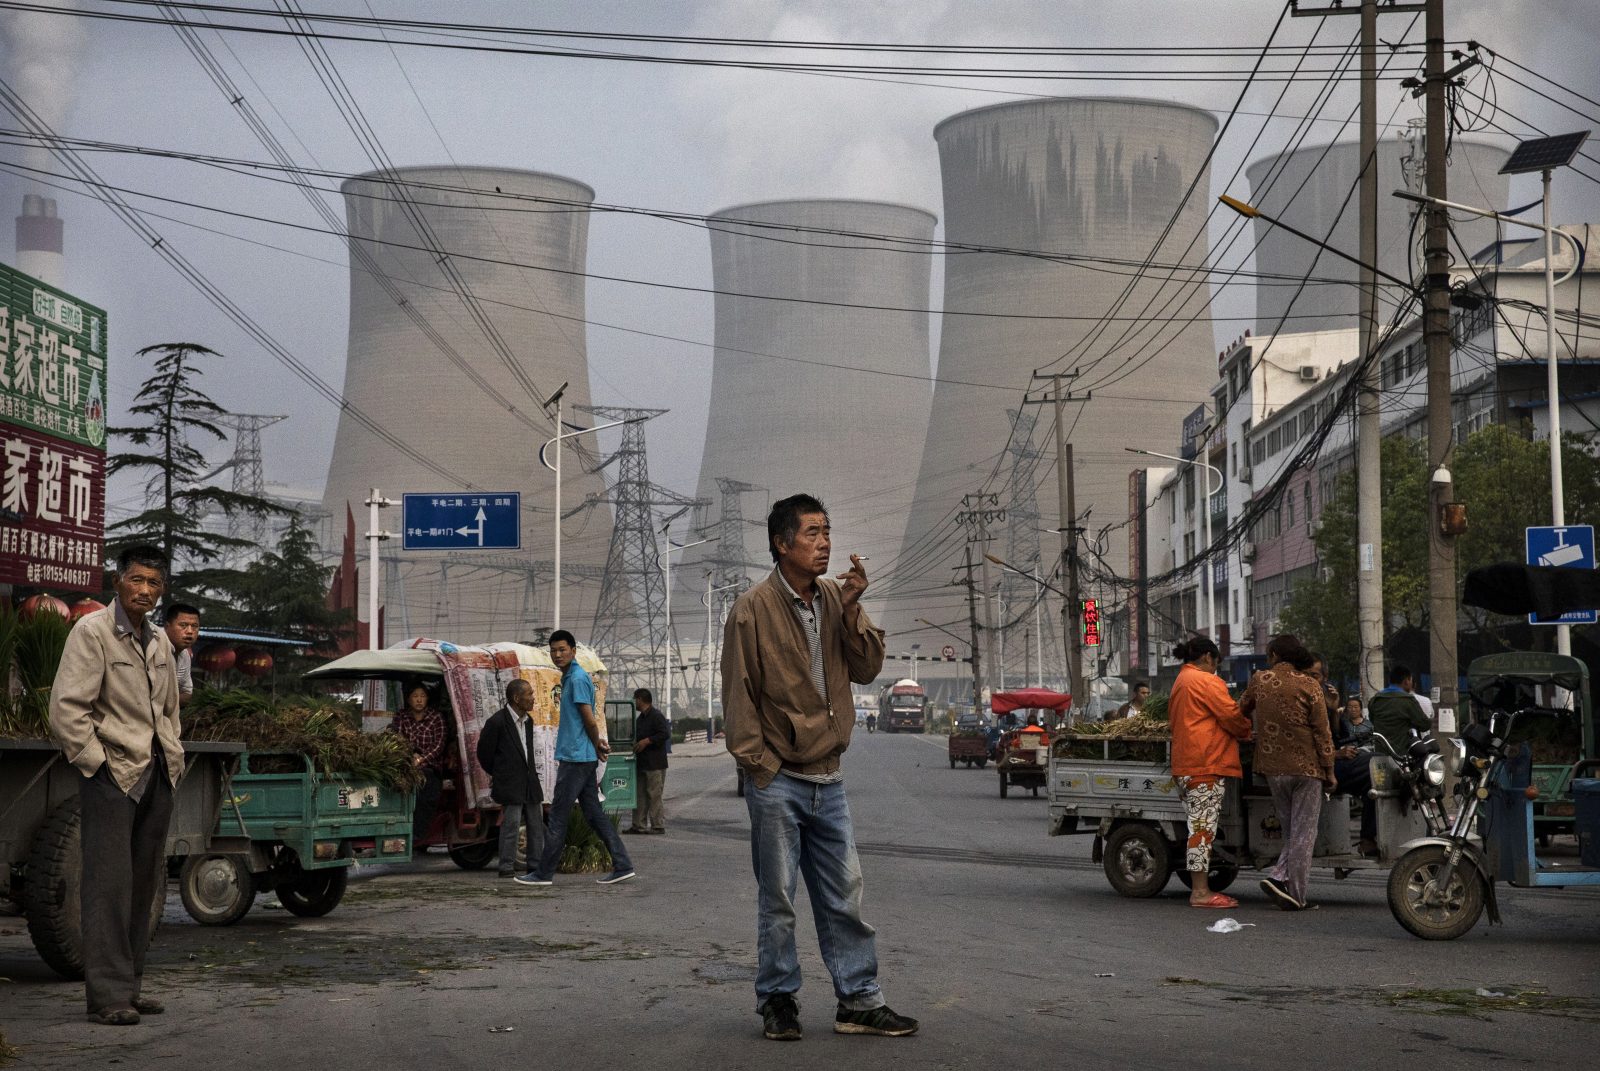 Street vendors and customers are gathered at a local market in front of a coal plant.